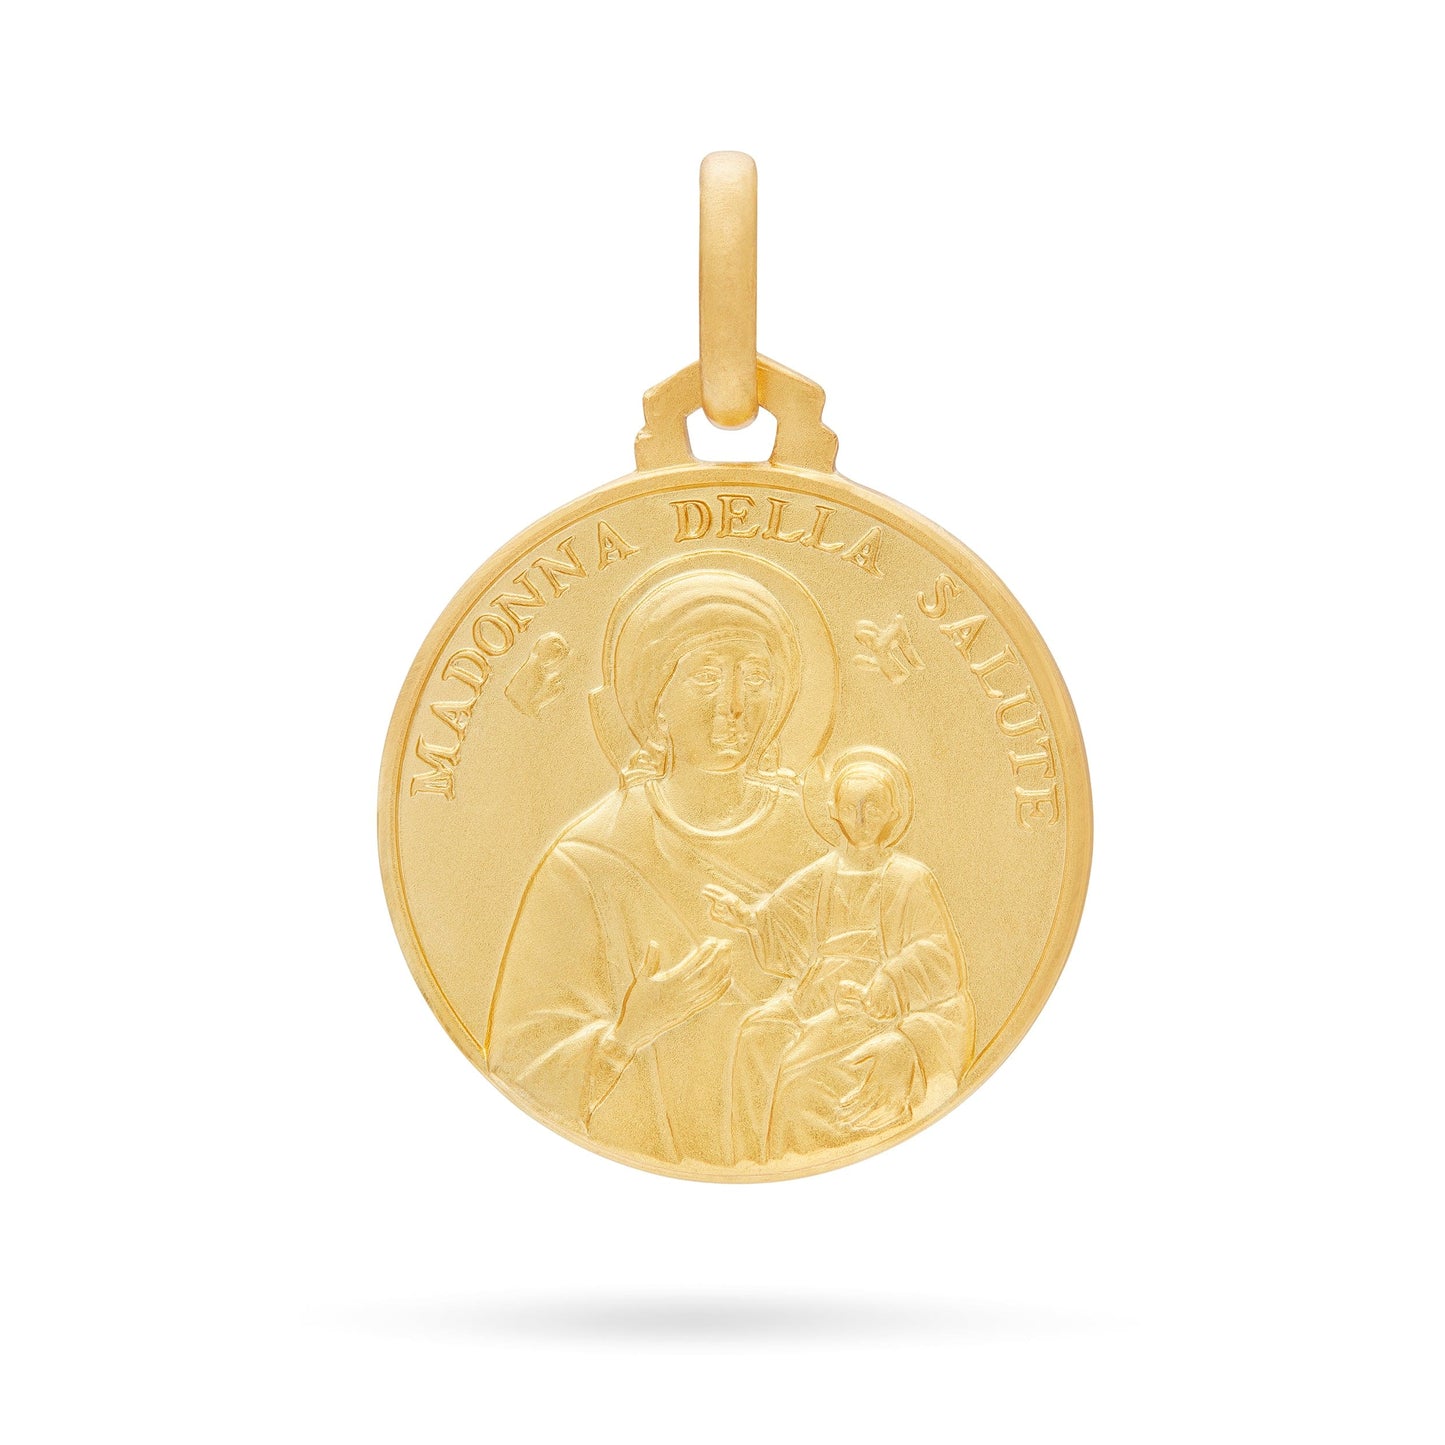 MONDO CATTOLICO Our Lady of Good Health Gold Medal